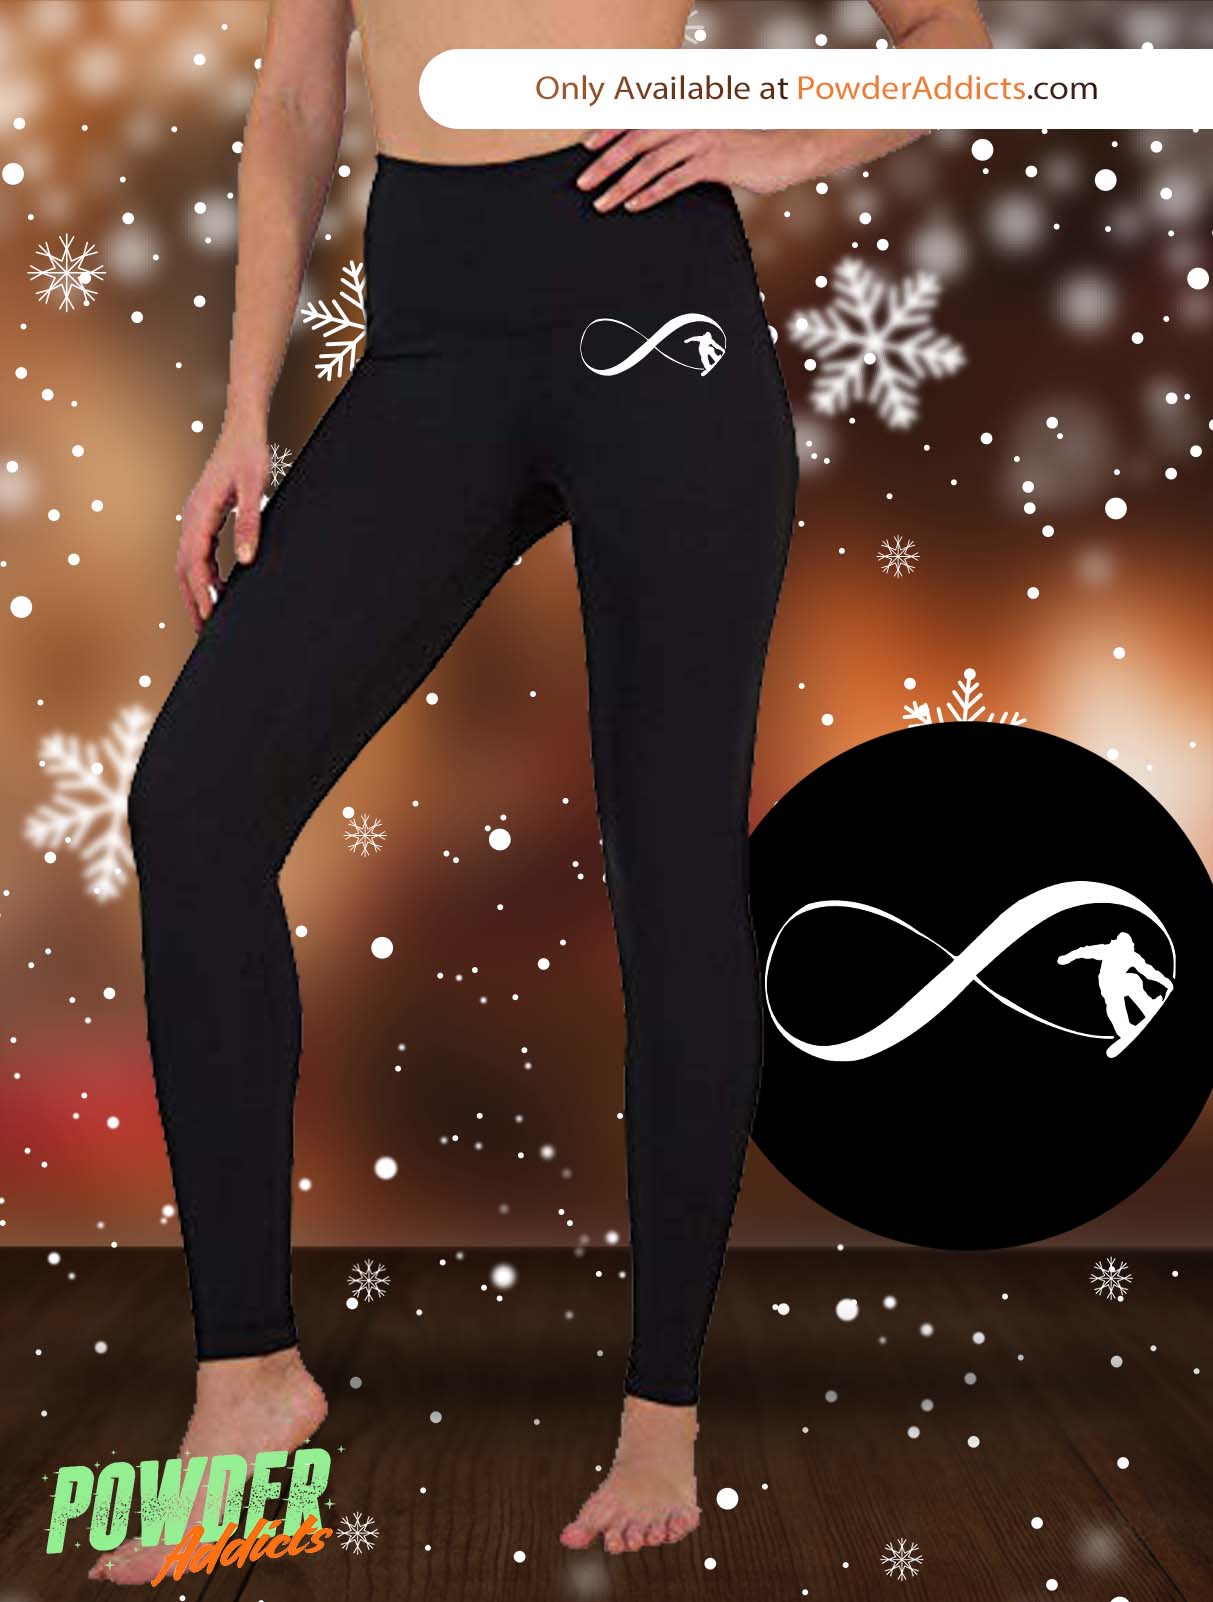 Infinity Snowbaord Women's Embroidered Leggings - Powderaddicts